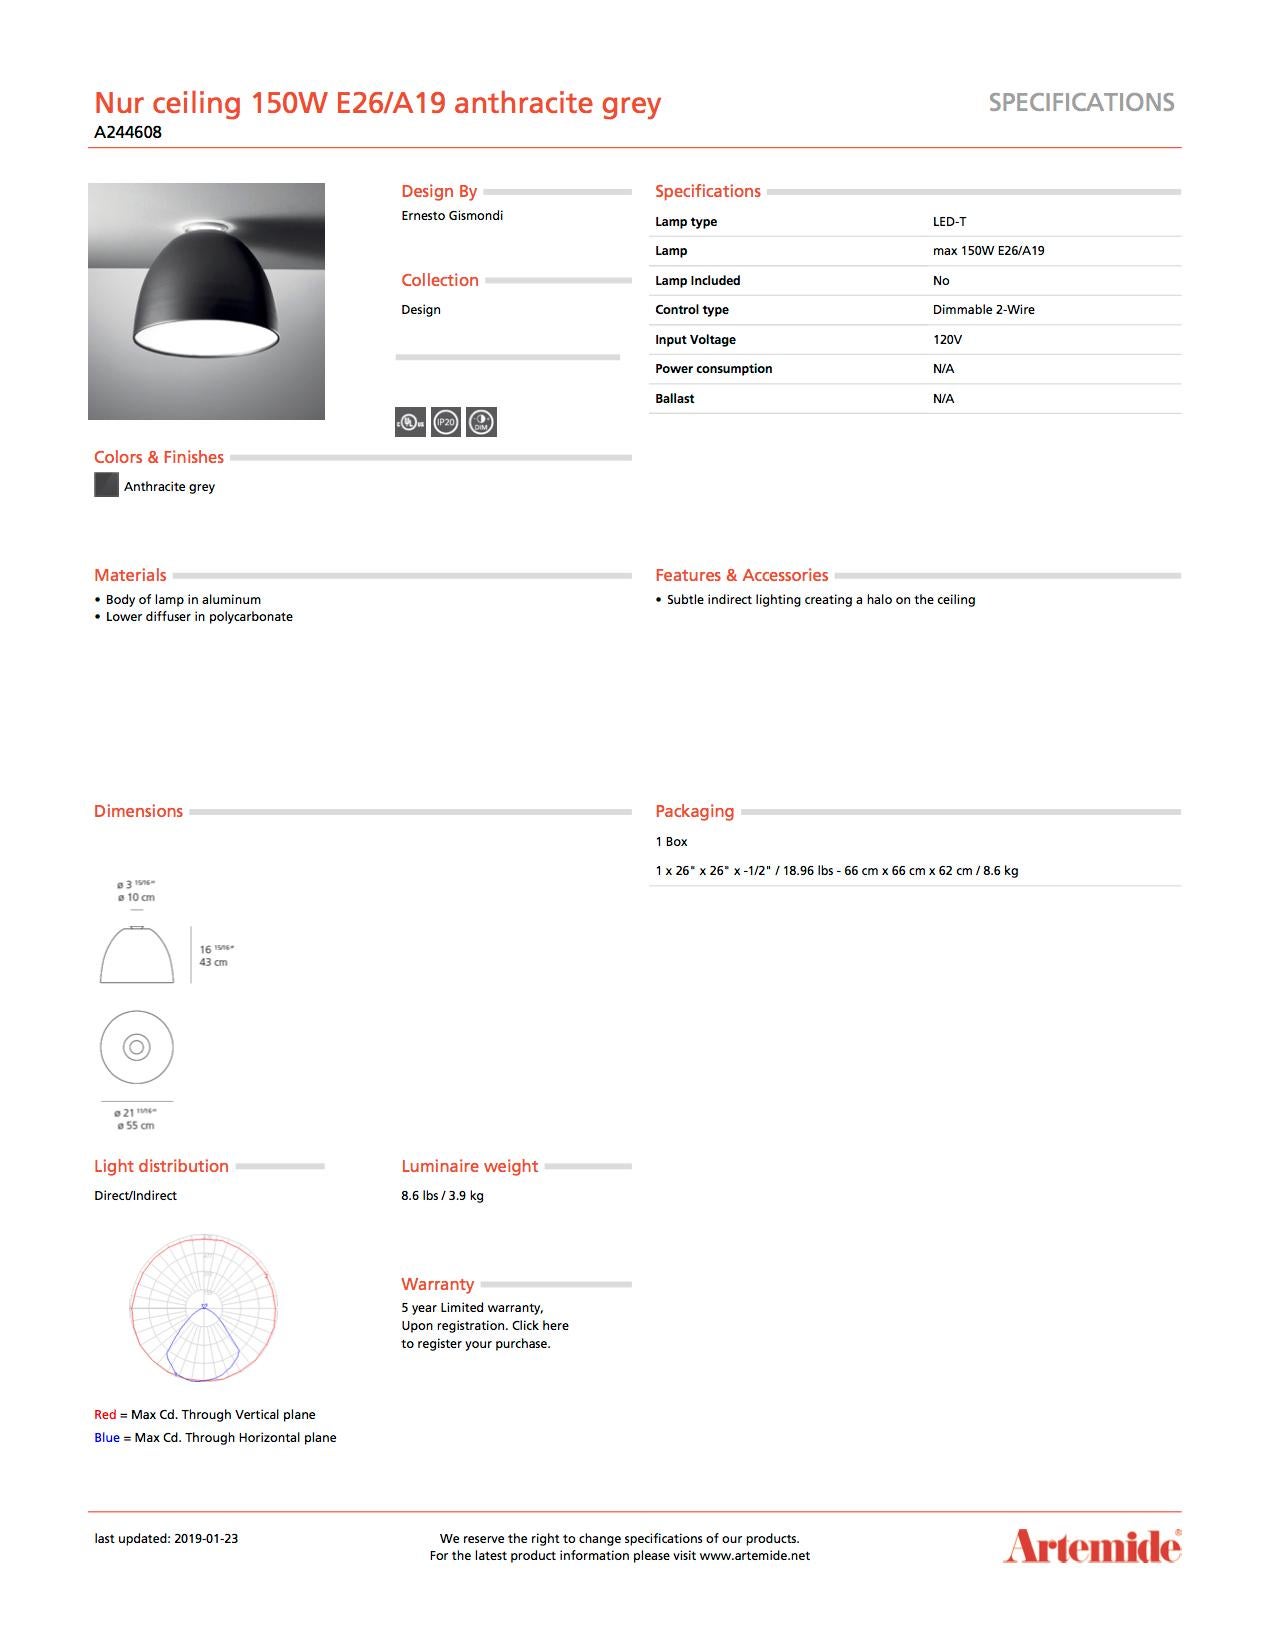 Modern Artemide Nur 150W E26 or A19 Ceiling Light in Anthracite Grey For Sale